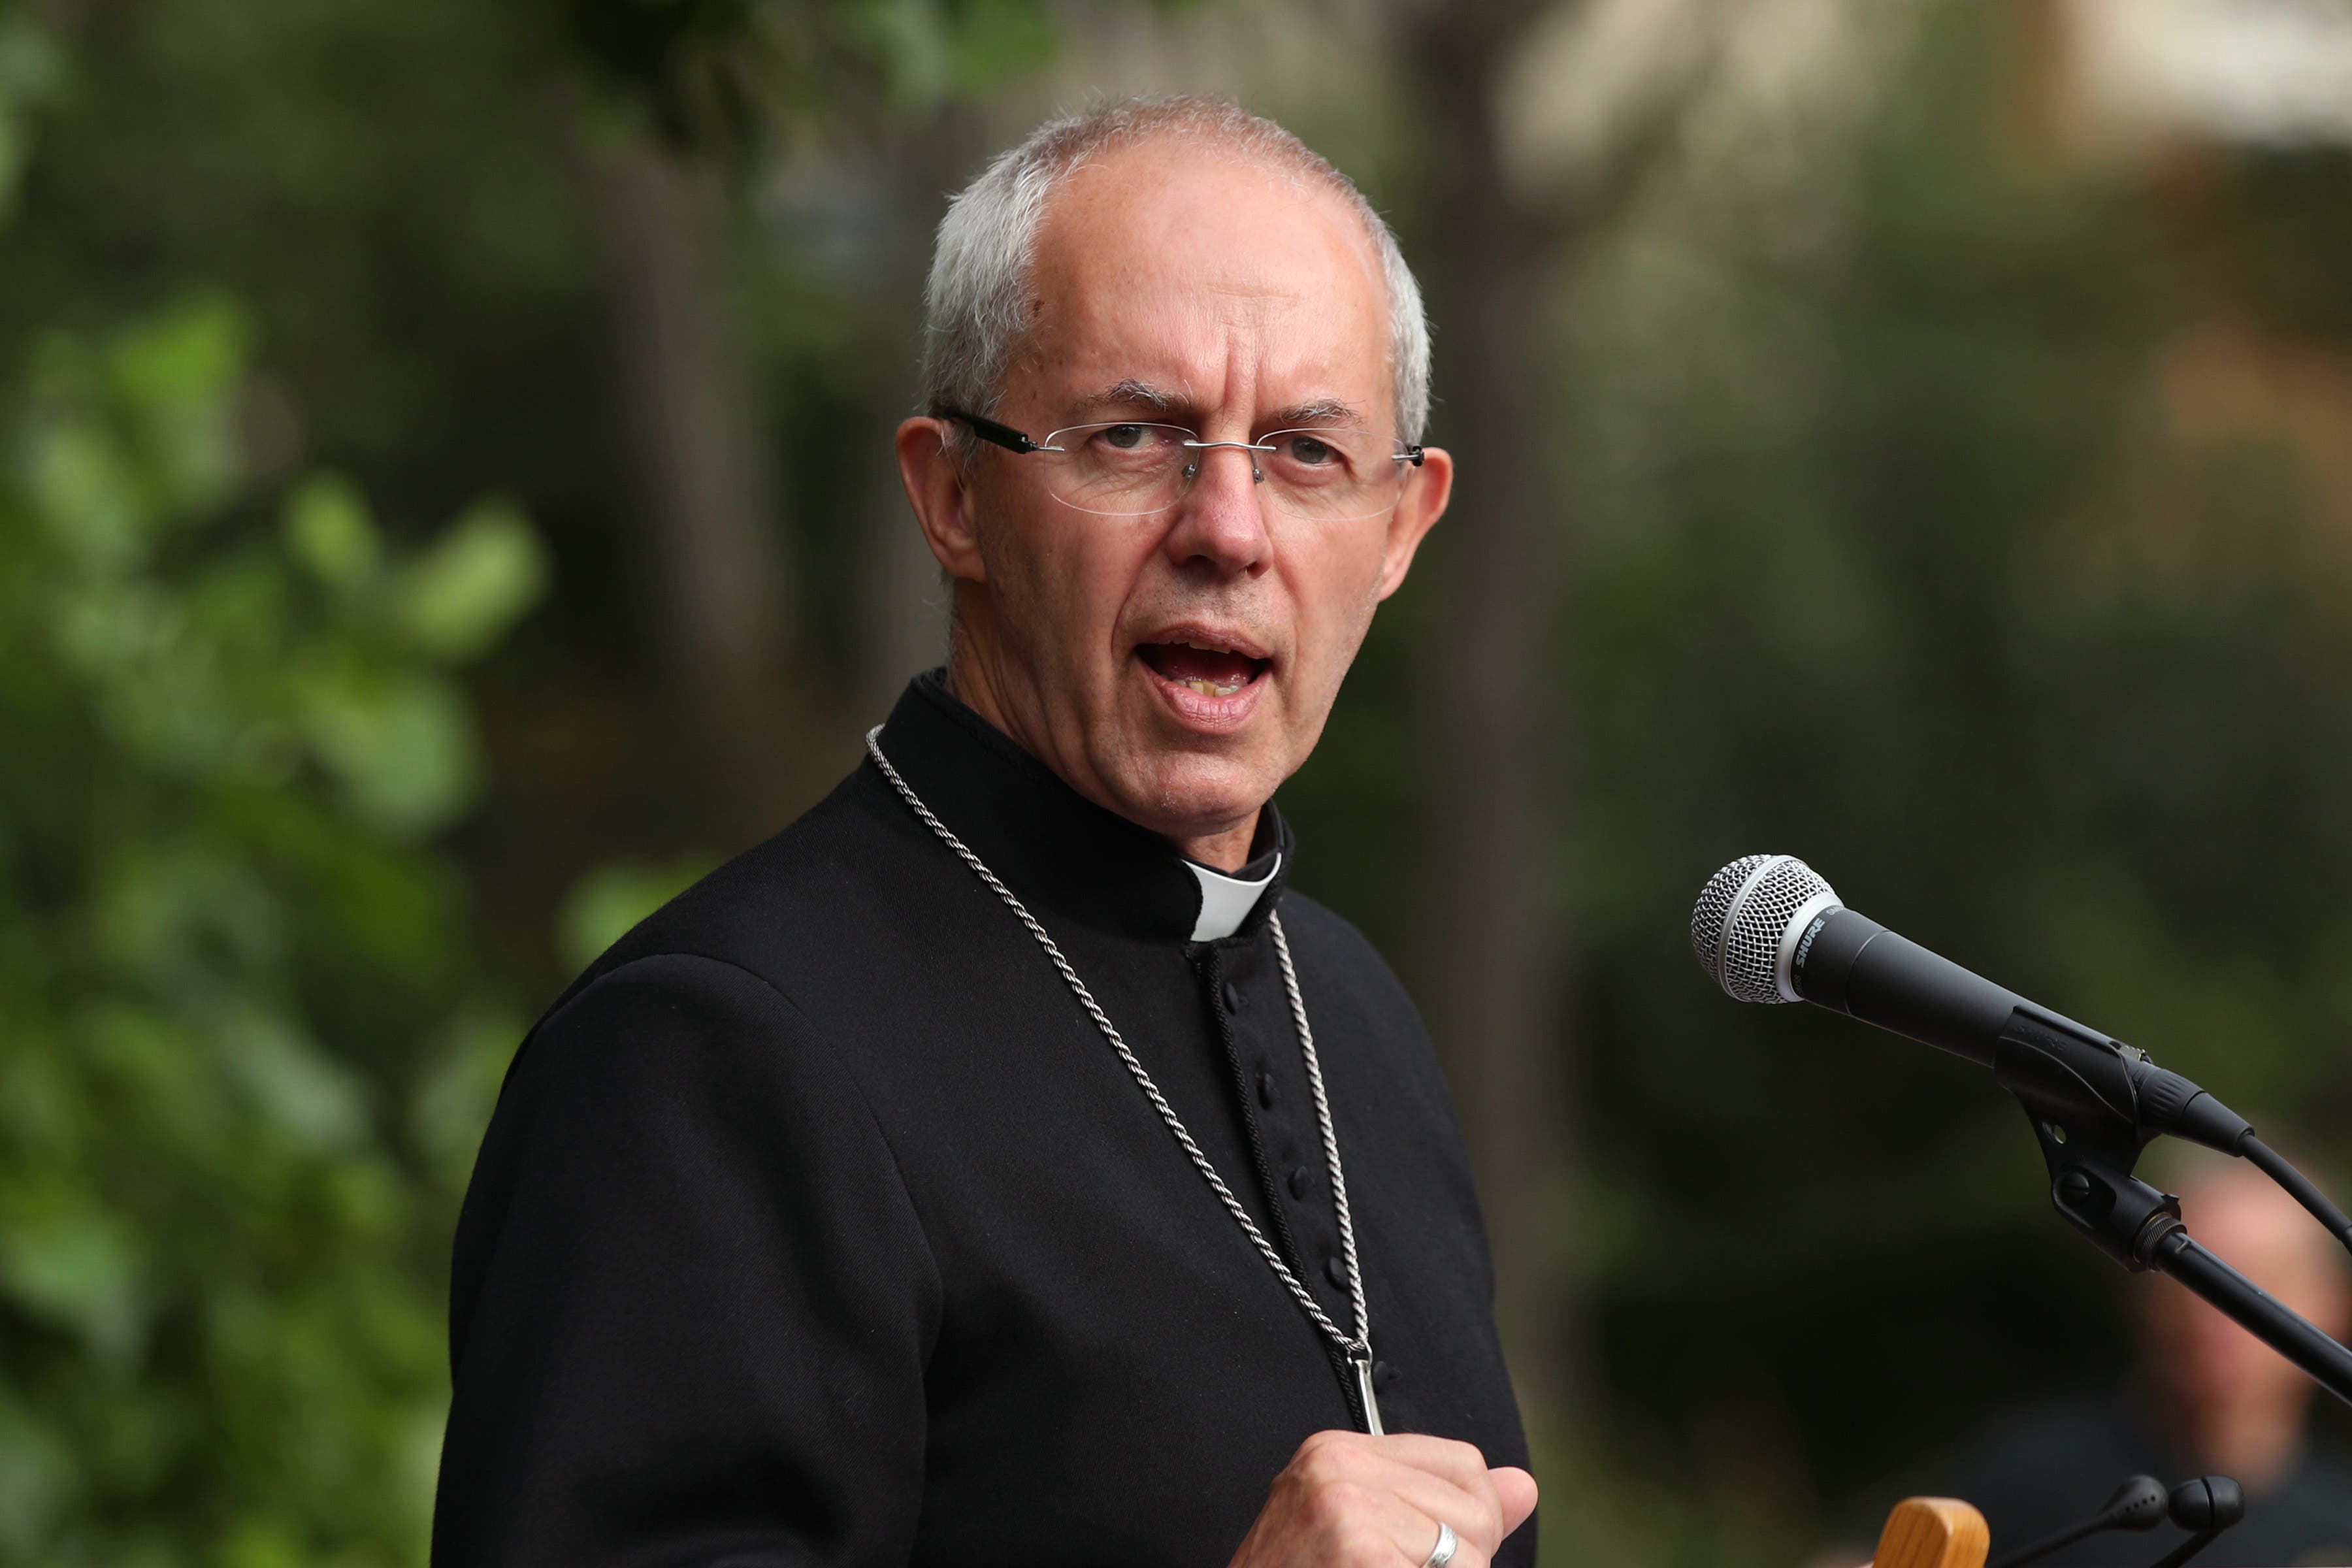 The Archbishop of Canterbury says care work needs to be valued